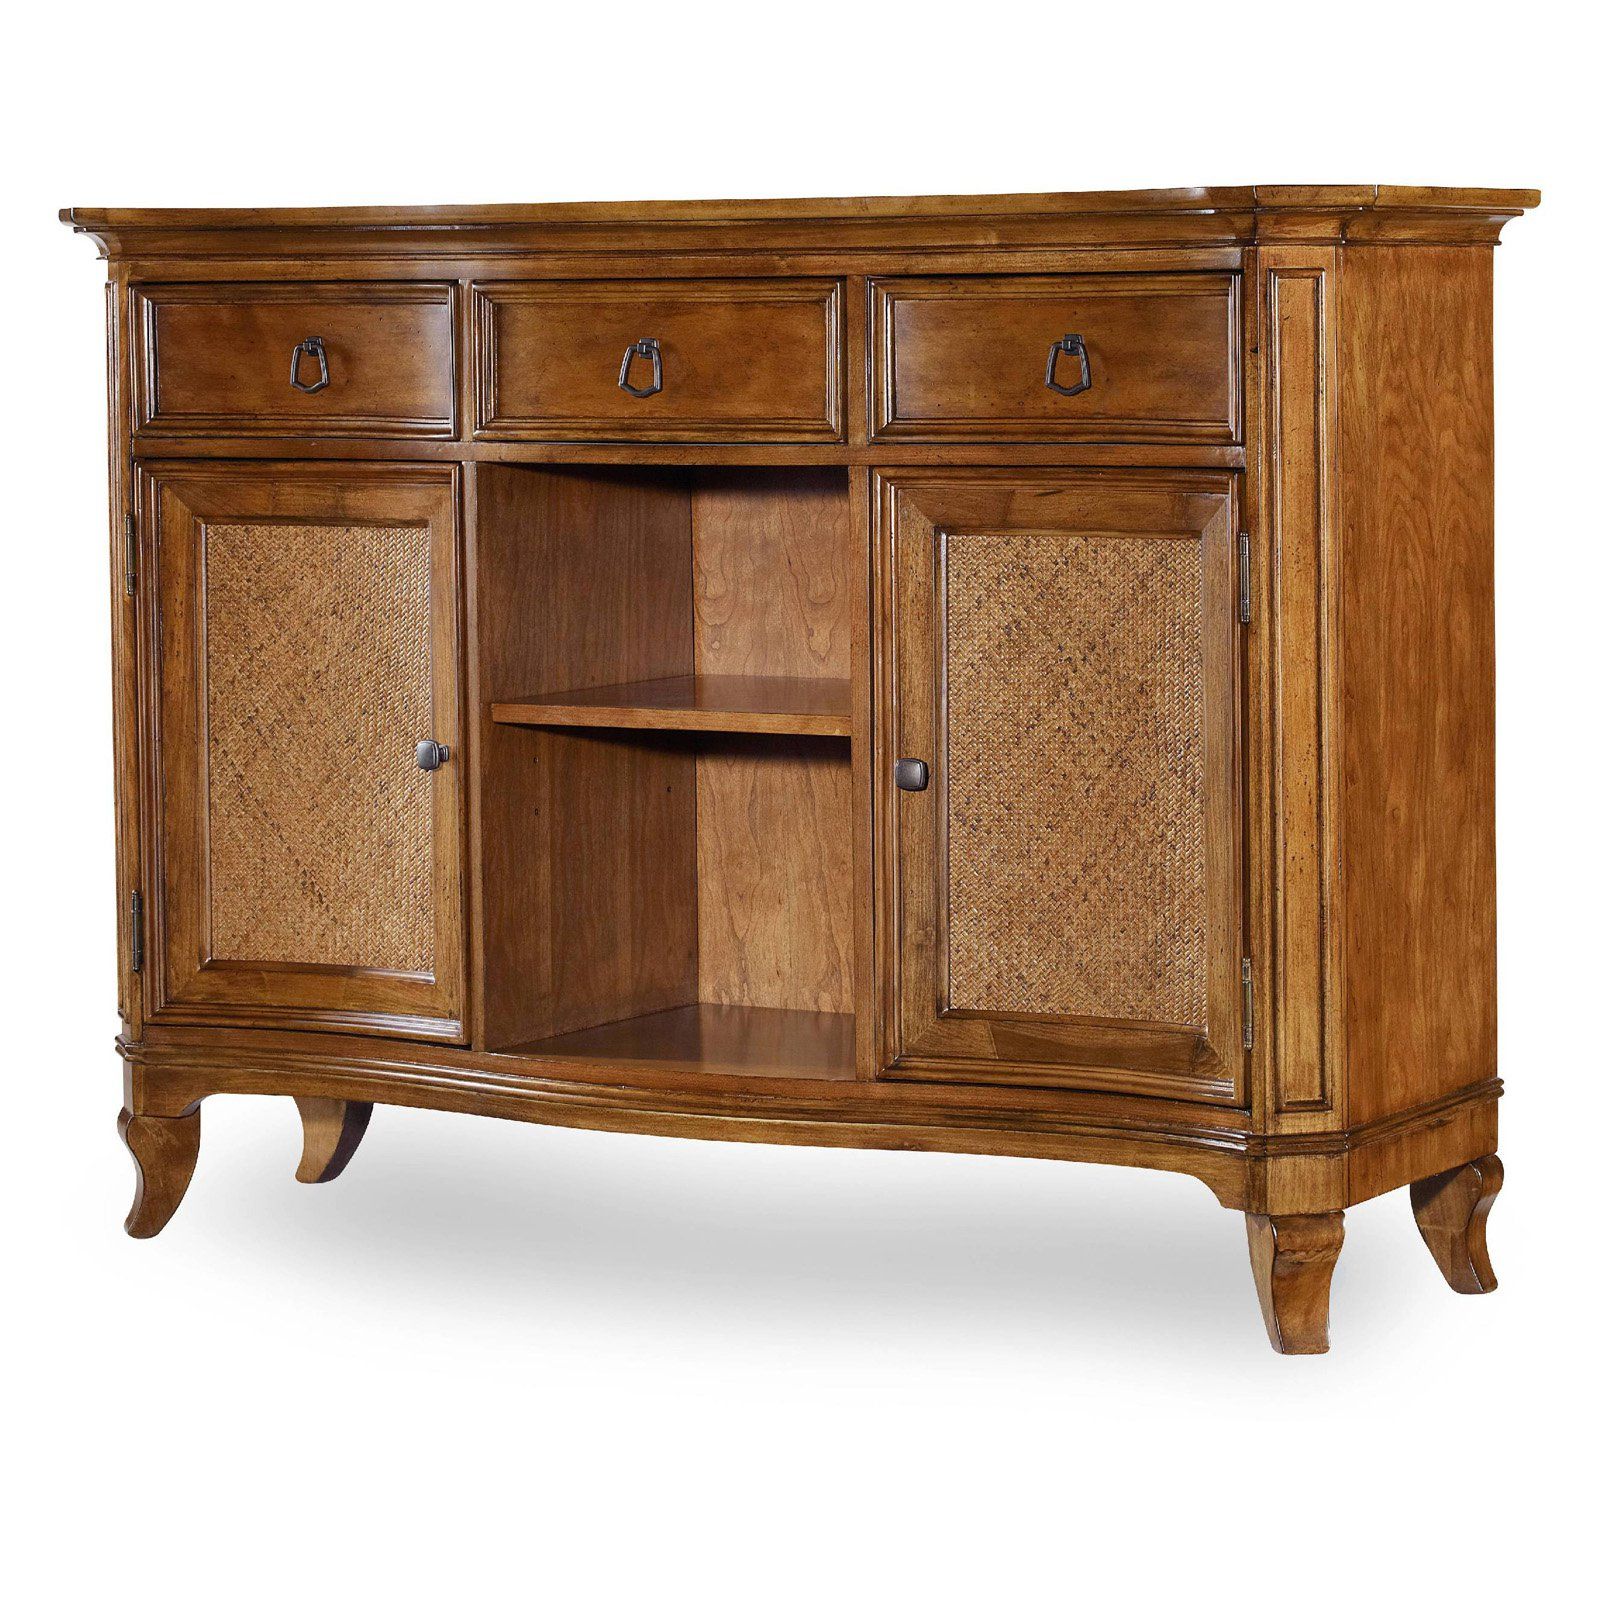 Hooker Furniture Windward 3 Drawer Buffet | Hayneedle Intended For Thatcher Sideboards (View 11 of 20)